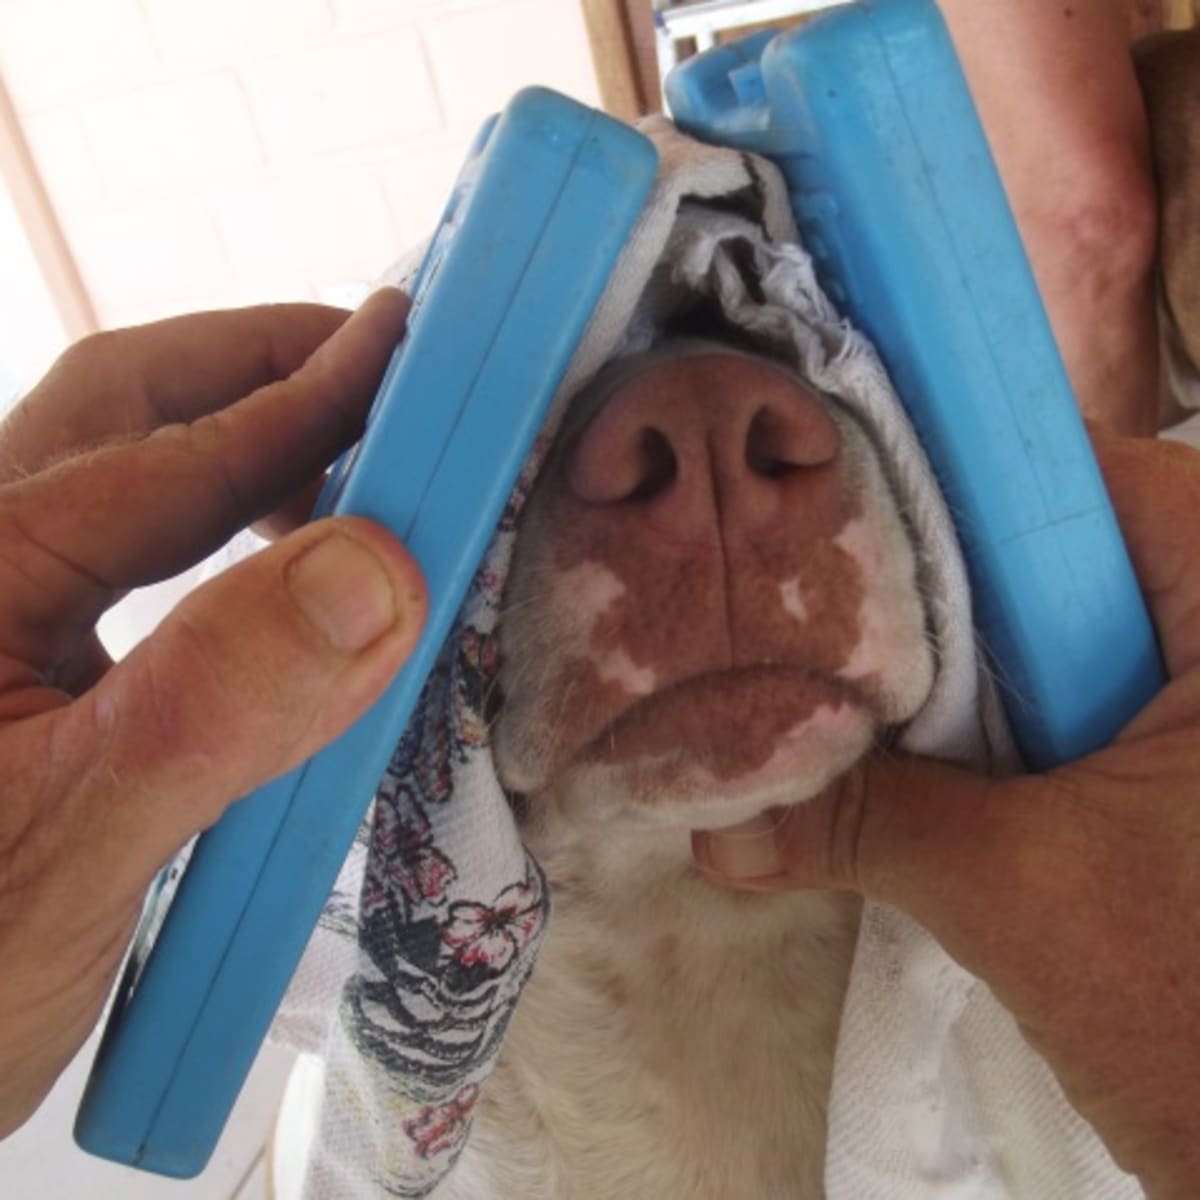 what happens if a dog gets water up its nose